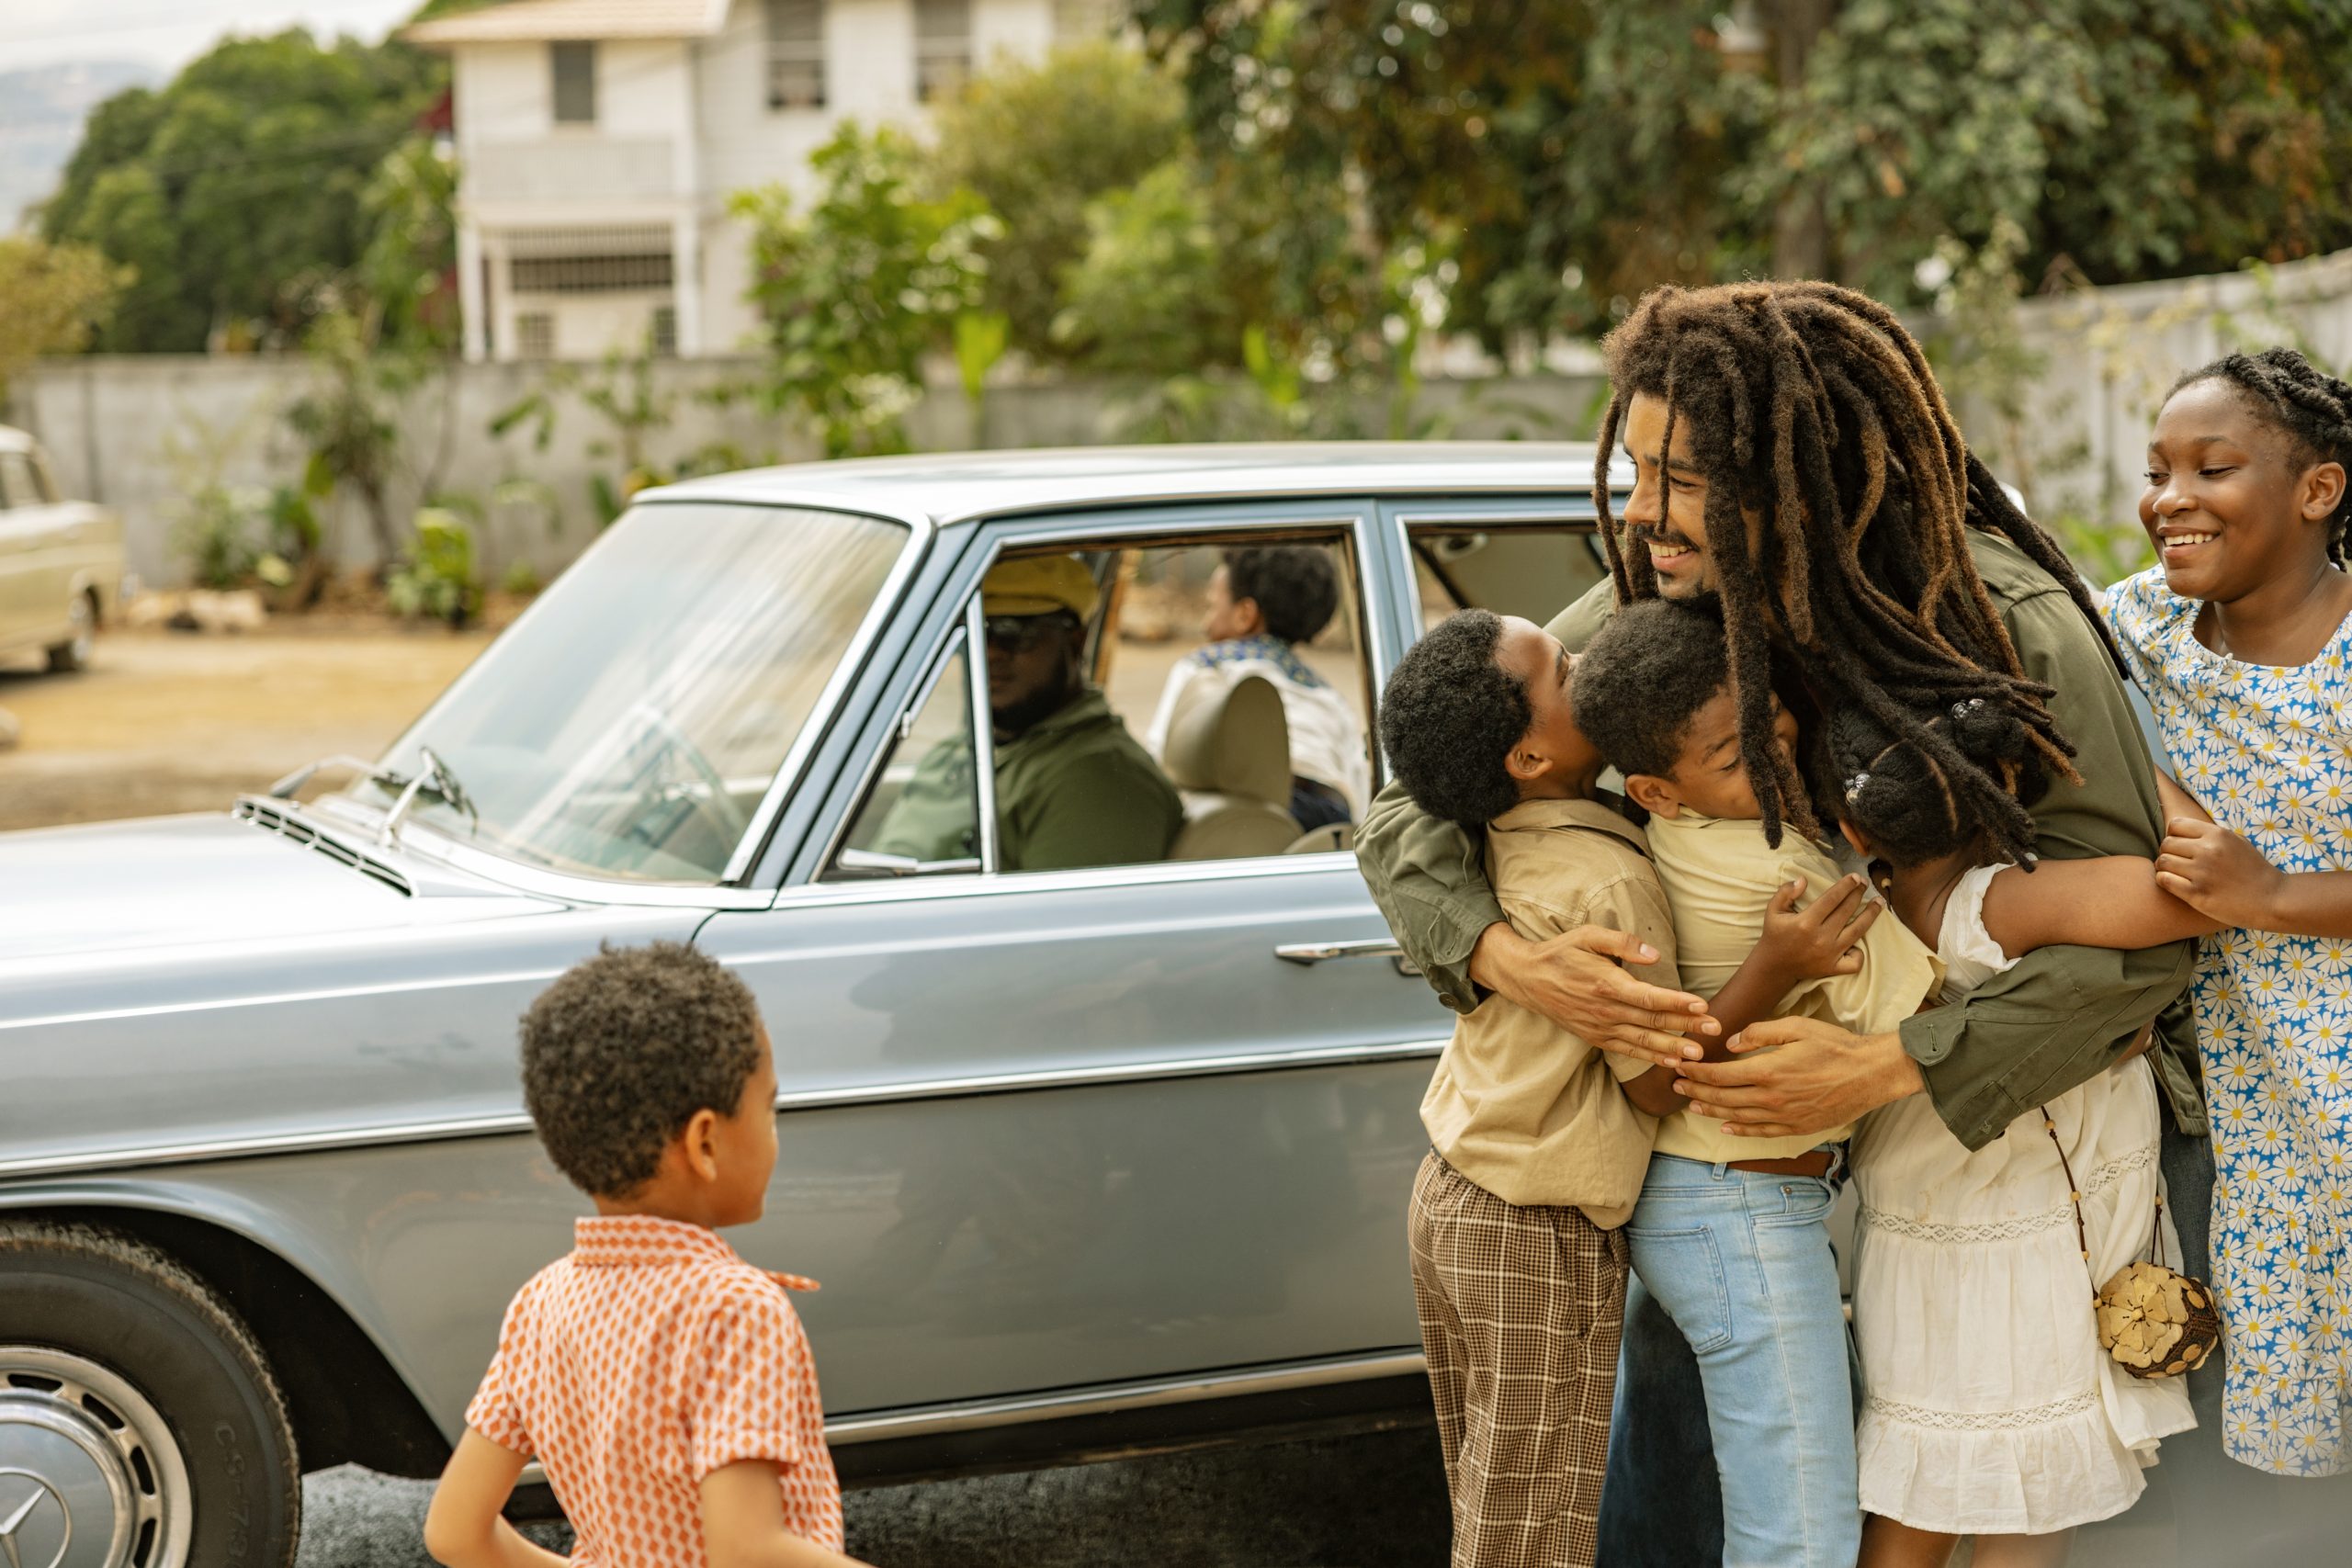 Kingsley Ben-Adir as “Bob Marley” in Bob Marley: One Love from Paramount Pictures.